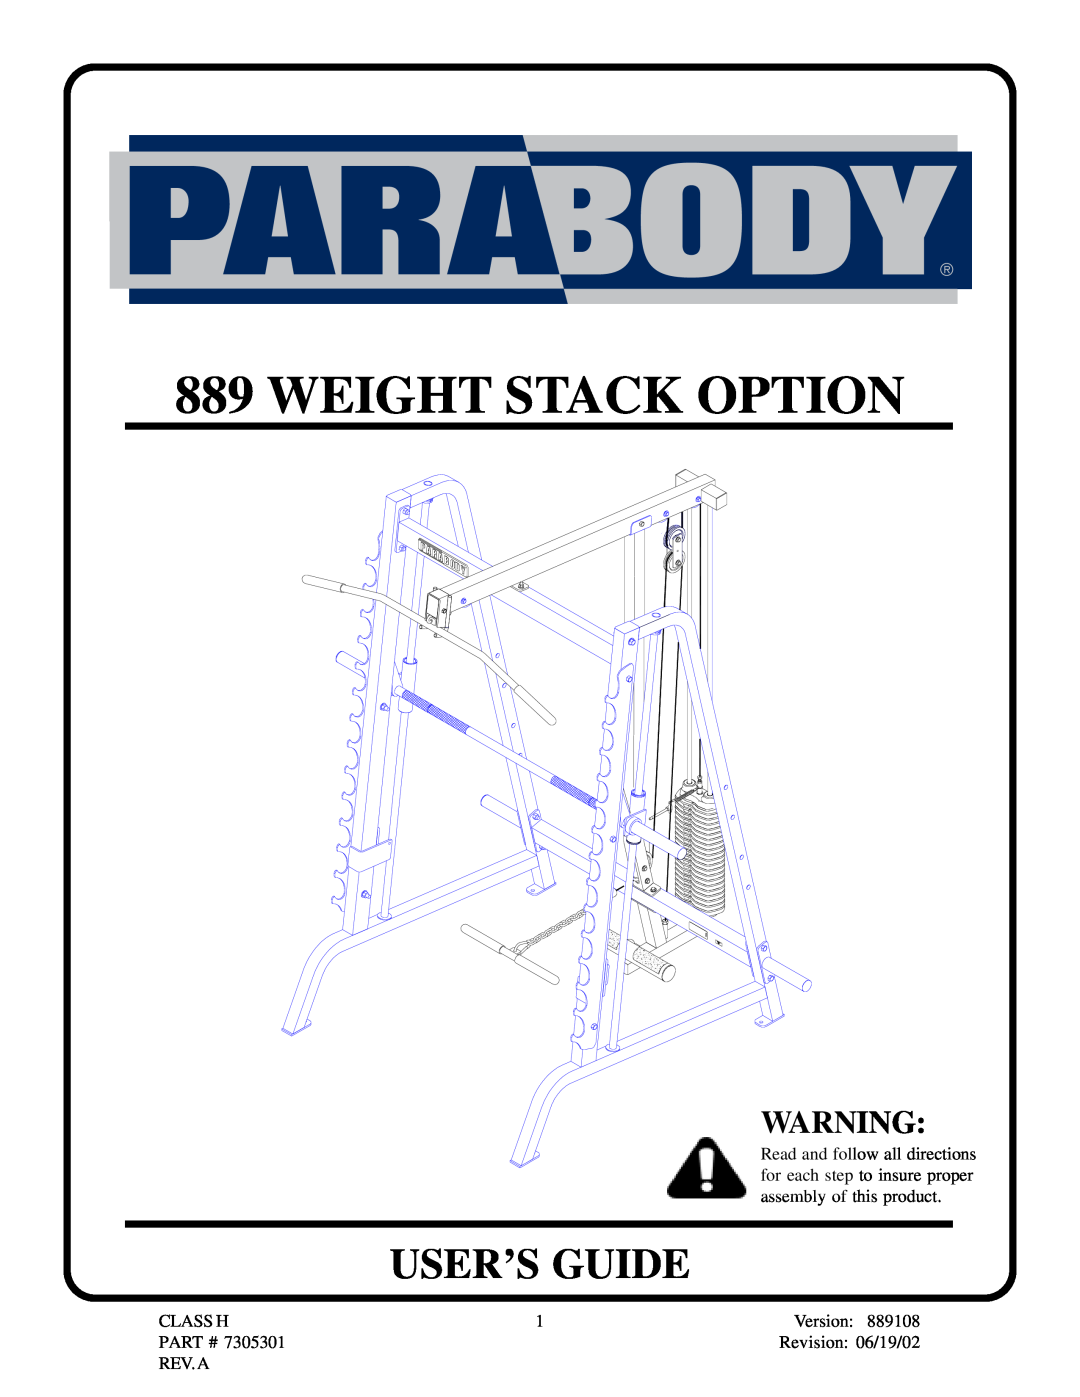 ParaBody 889 manual User’S Guide, Weight Stack Option 